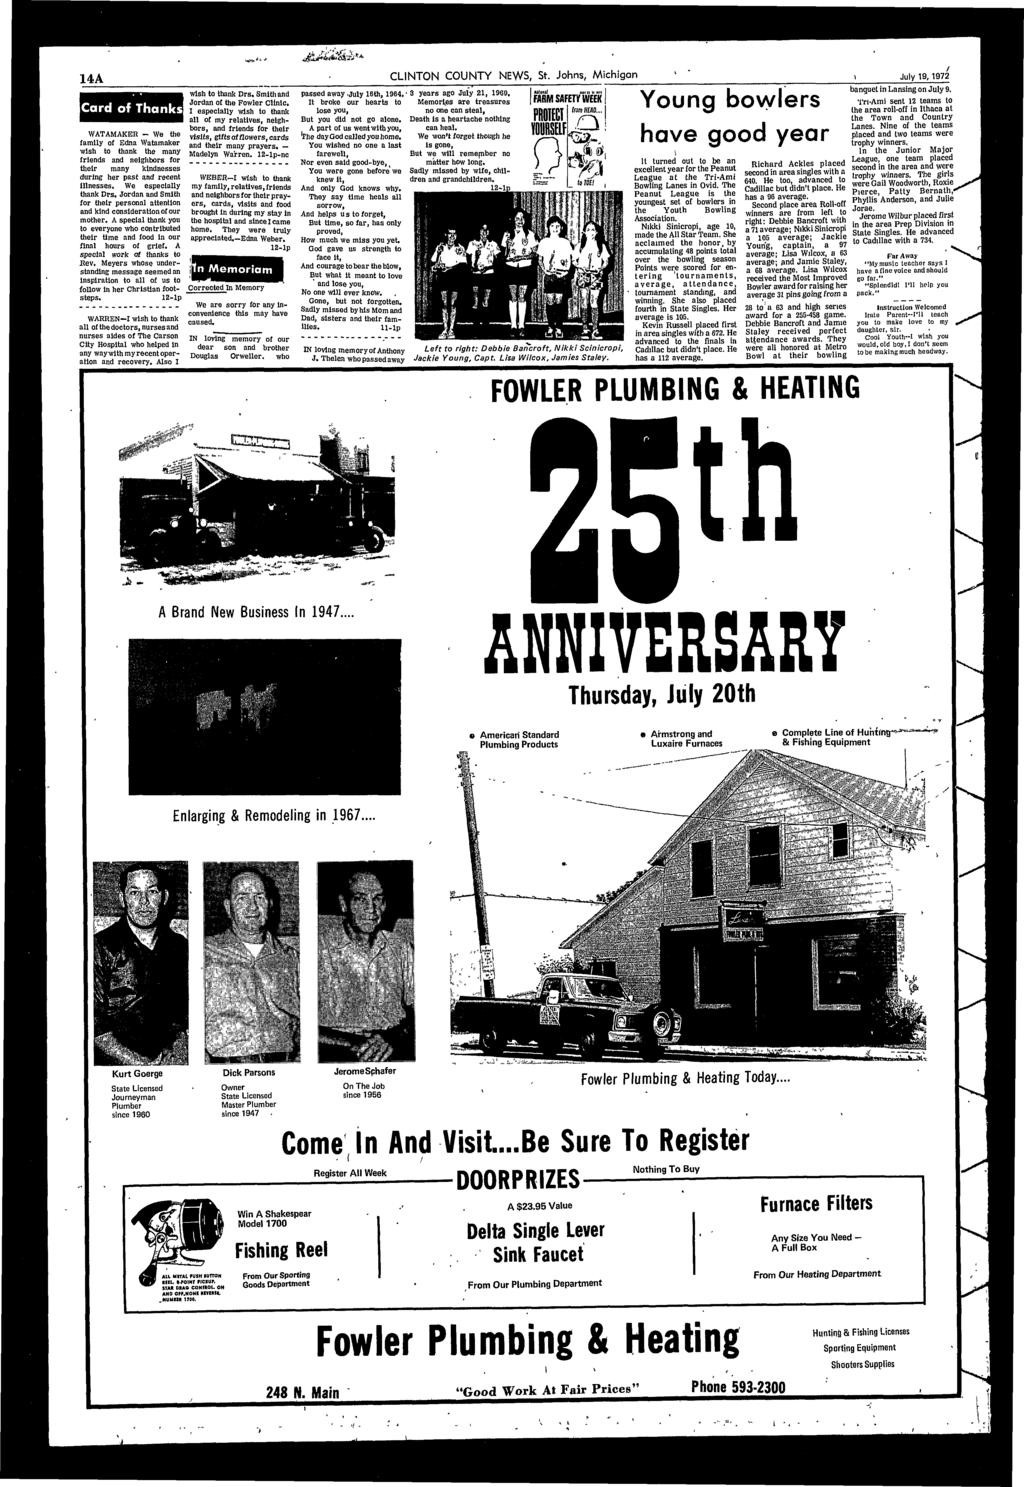 .K-> jy*m&* 14A CLINTON COUNTY NEWS, St. Johns, Mchgan July 19,1972 wsh to thank Drs, Smth and passed away -July 16th, 1964.